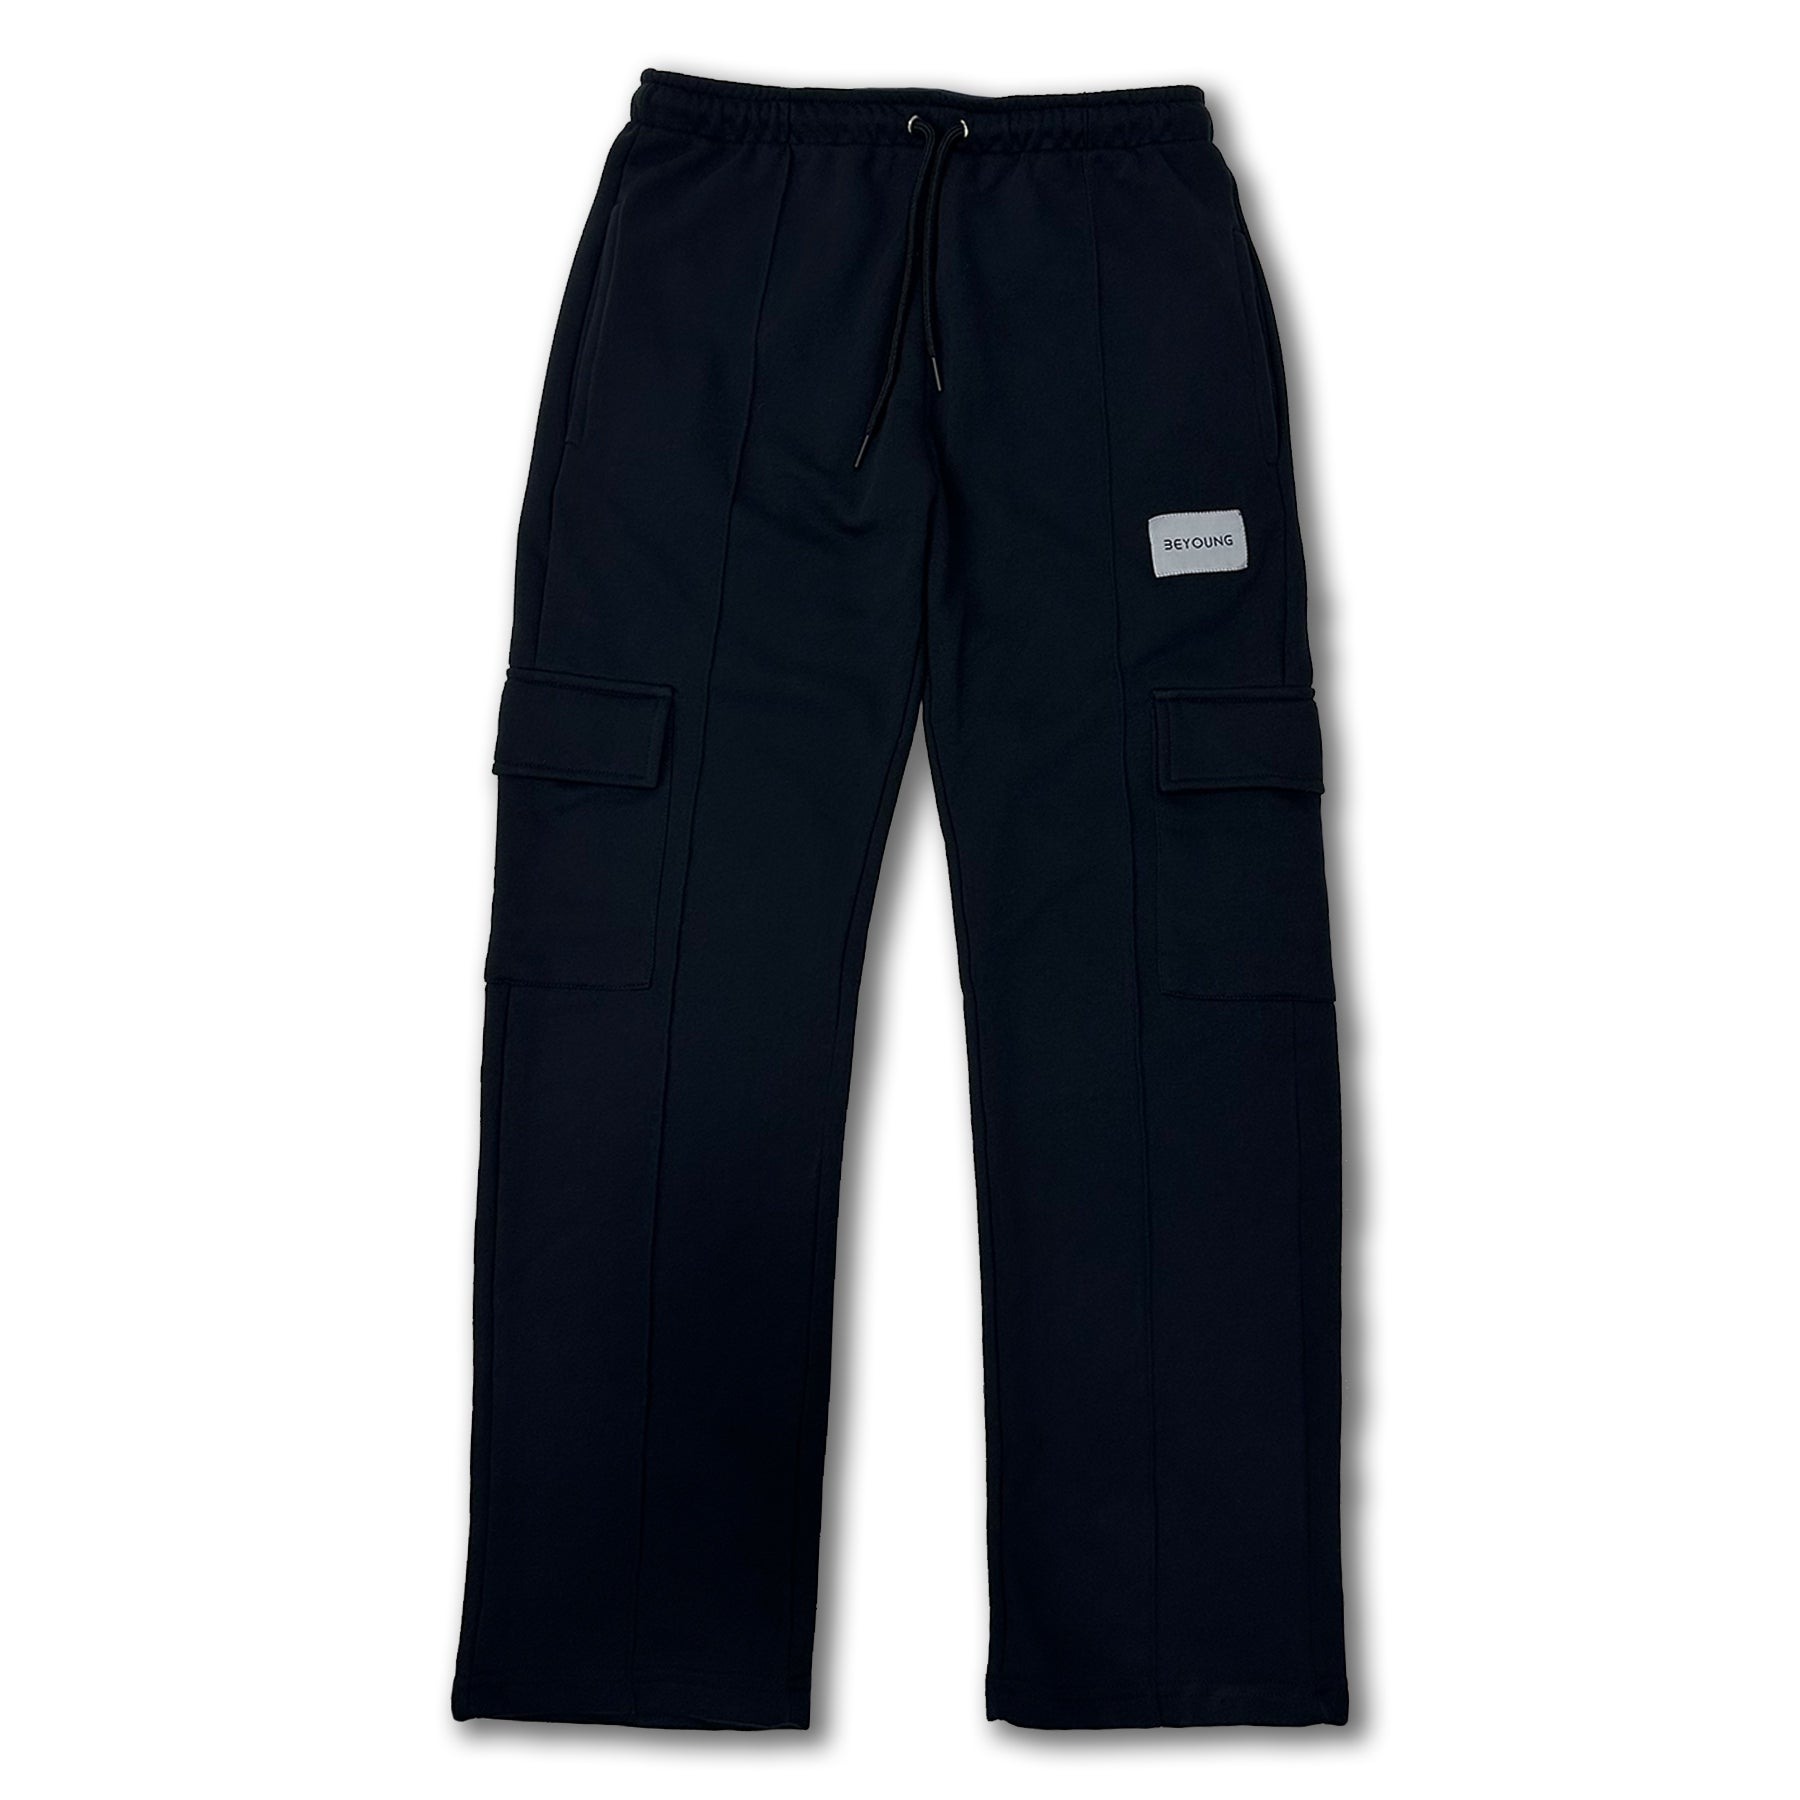 Unisex Beyoung straight fit Trouser